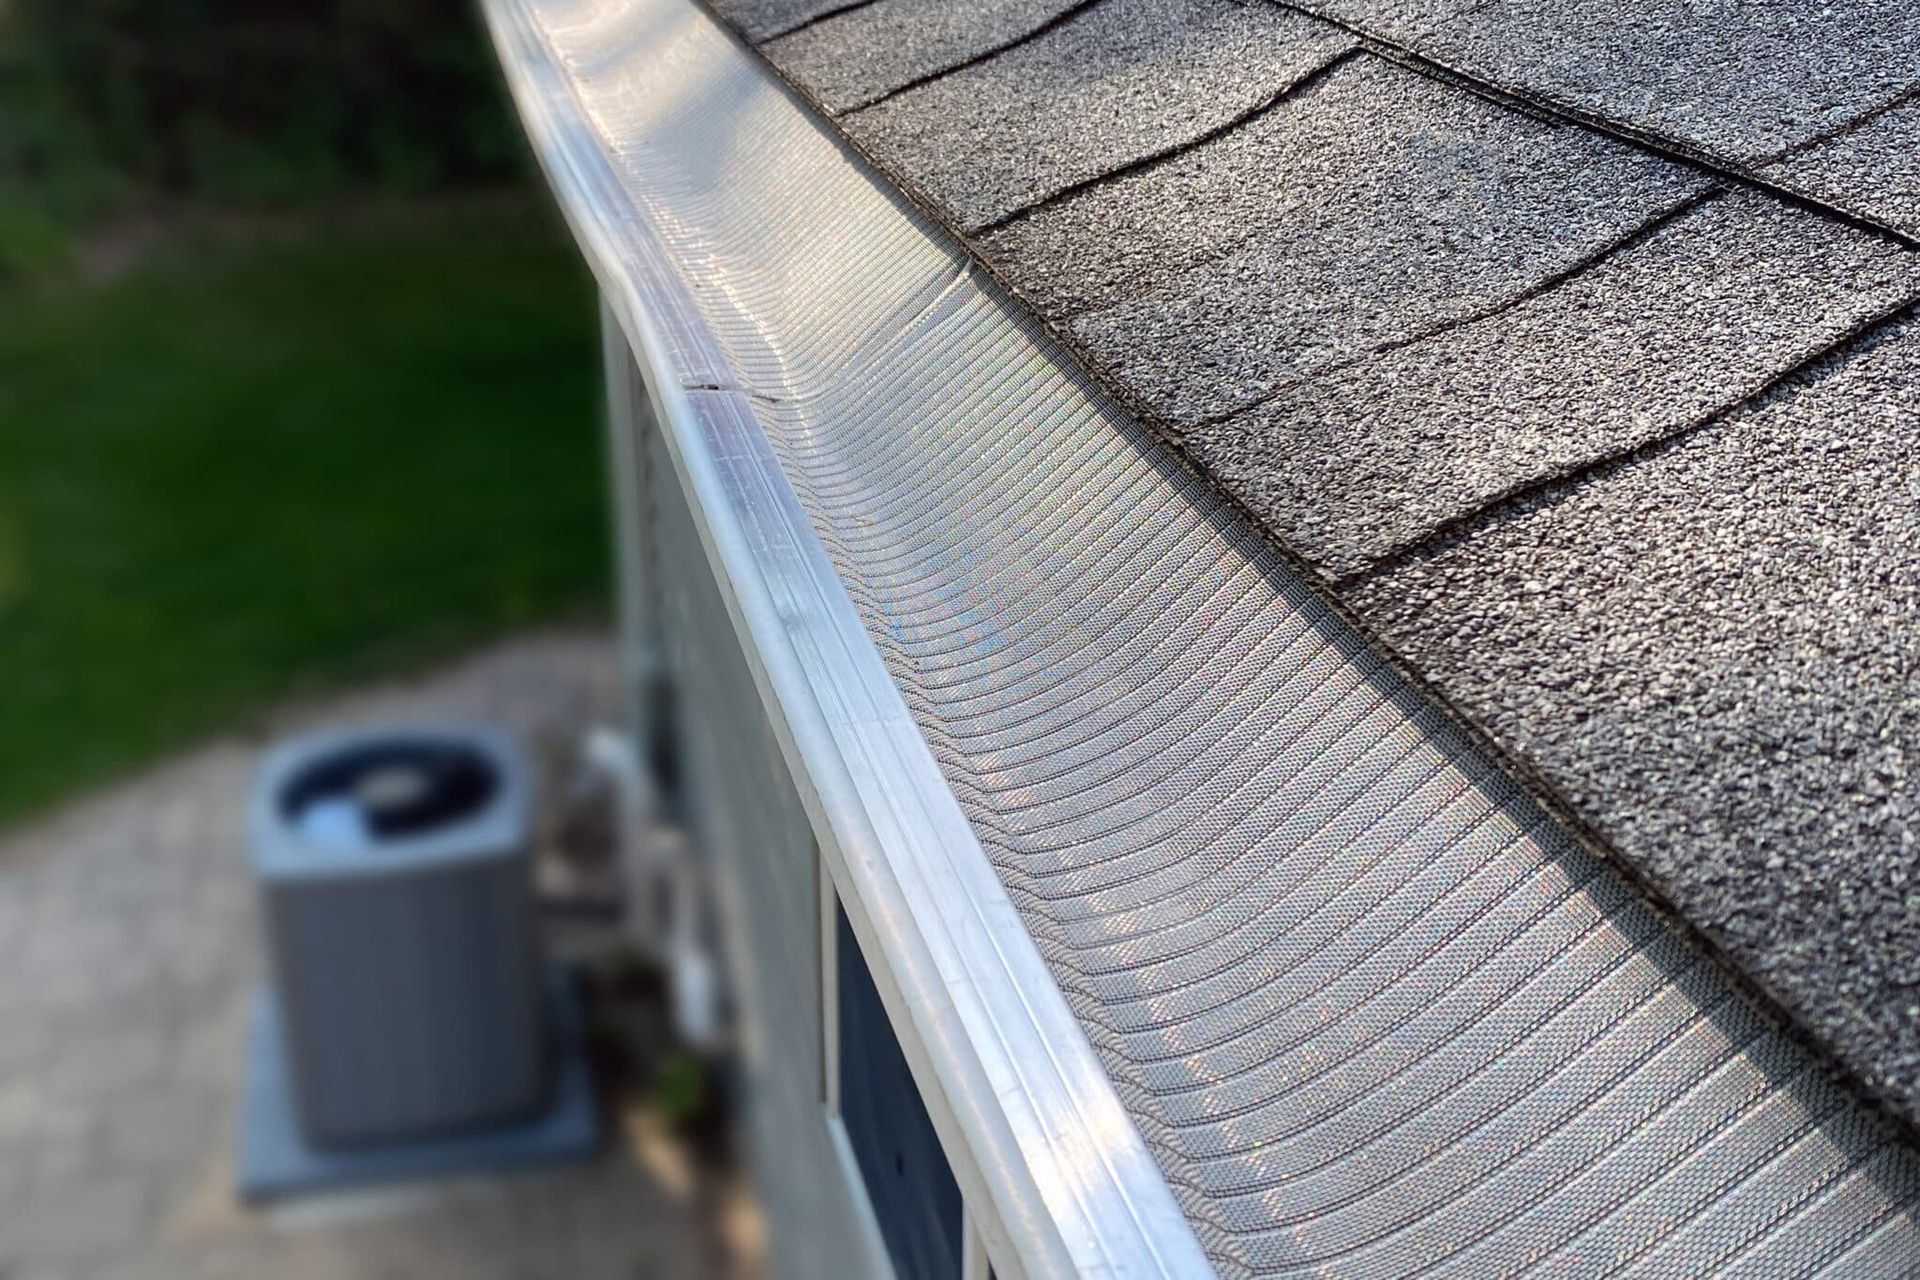 A close-up view of a roof gutter system installed along the edge of a house.